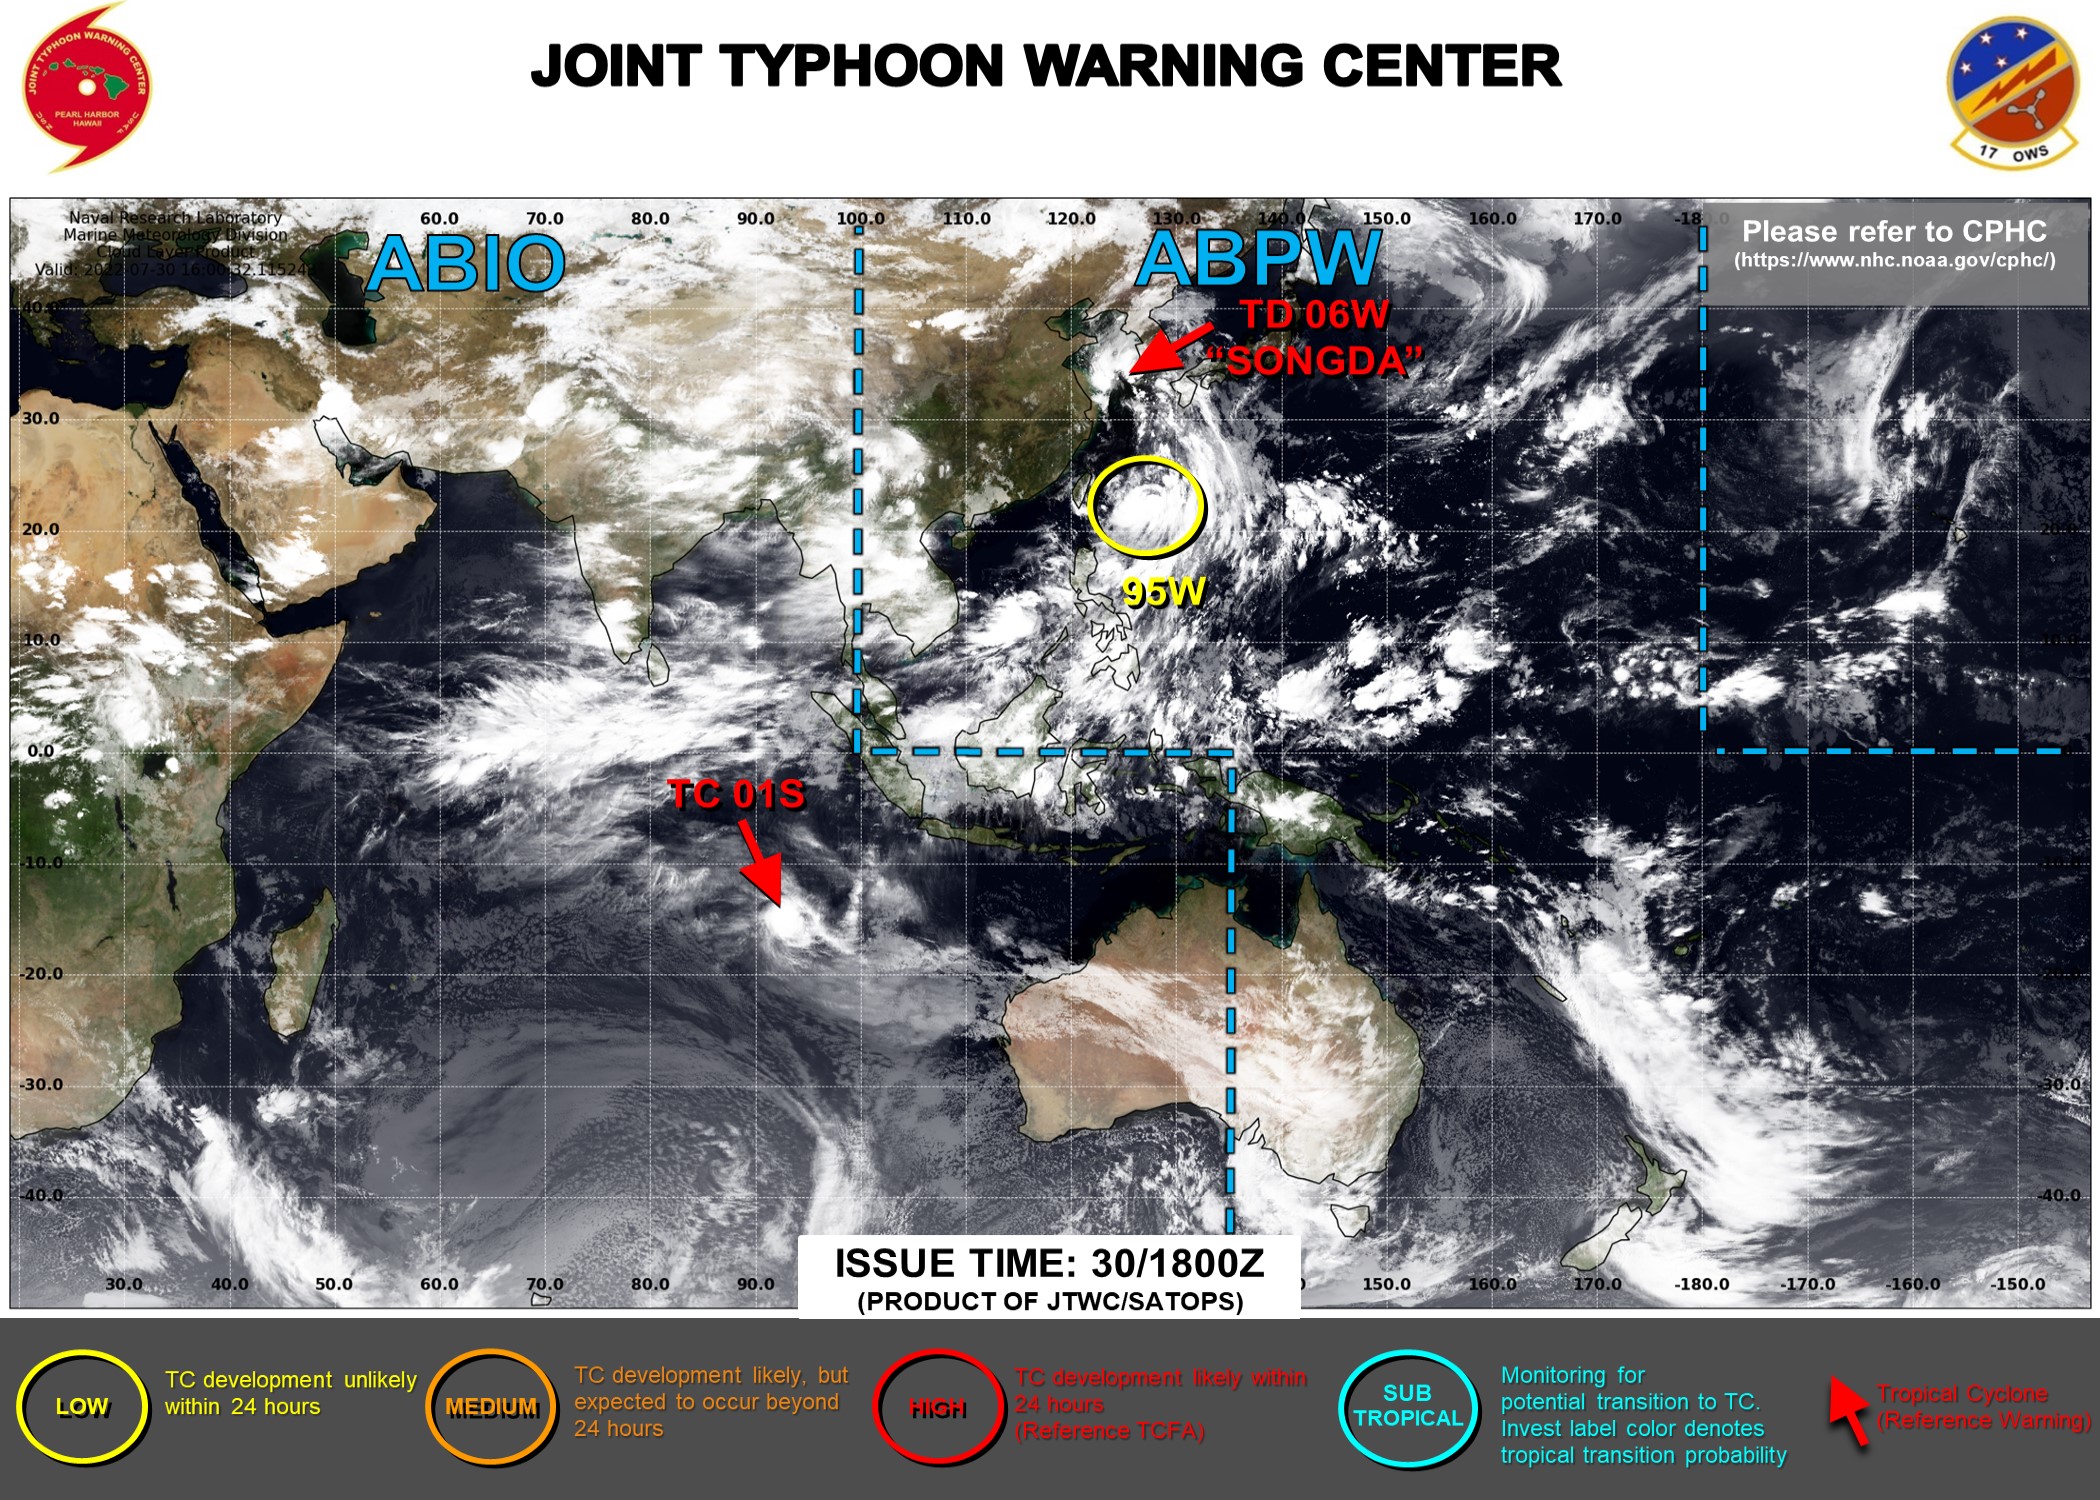 JTWC IS ISSUING 6HOURLY WARNINGS ON 06W(SONGDA) AND 12HOURLY WARNINGS ON 01S. 3HOURLY SATELLITE BULLETINS ARE ISSUED ON BOTH SYSTEMS.